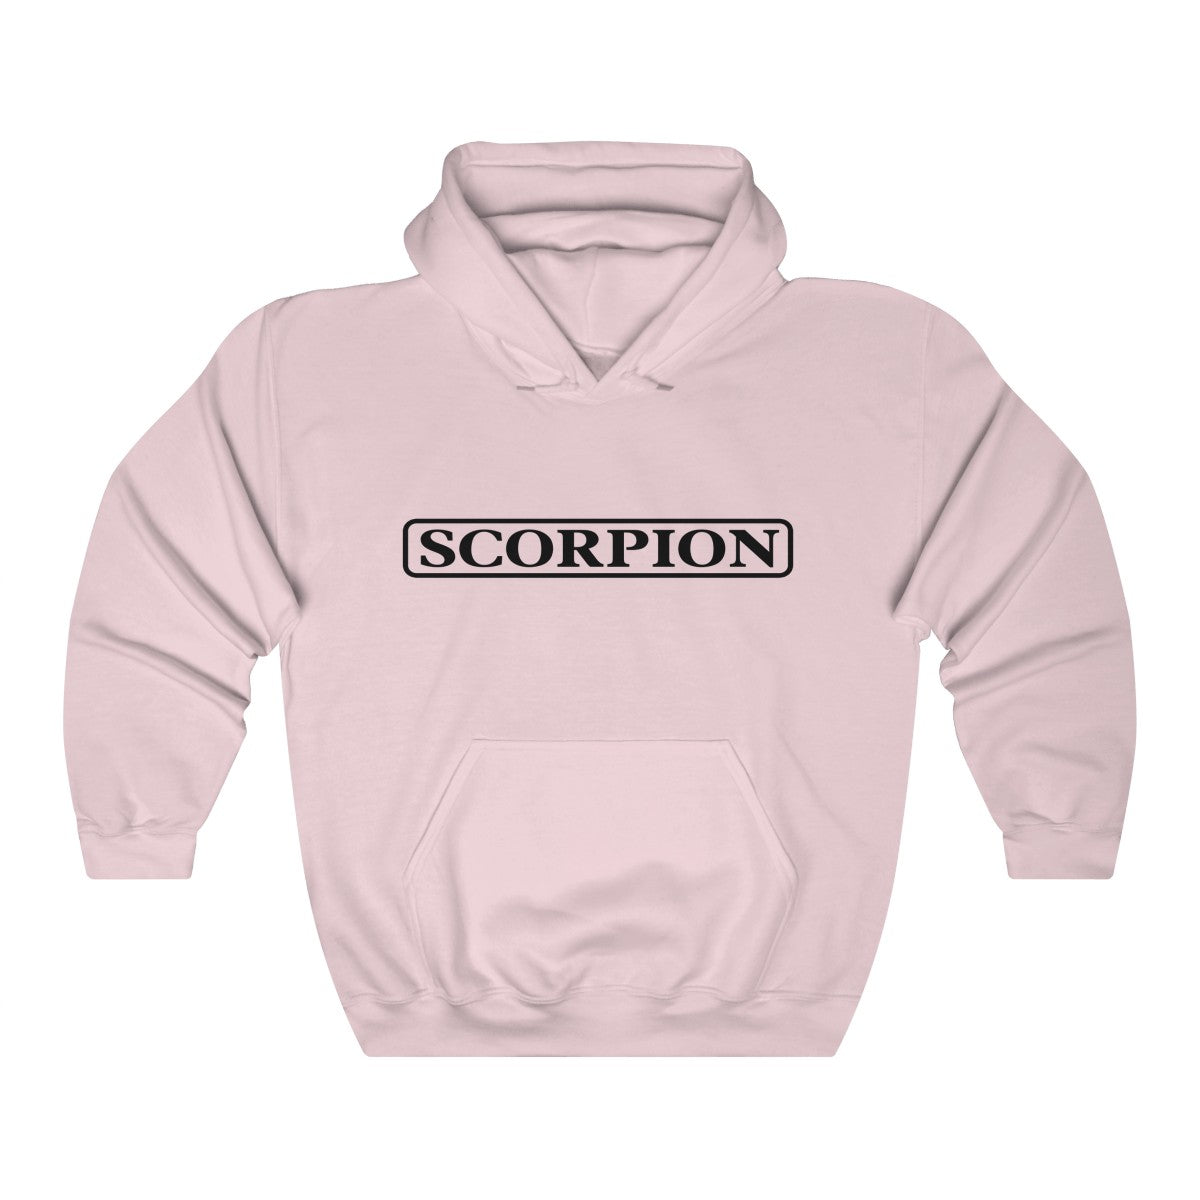 Scorpion Drizzy Drake Scary Hours Merch Inspired Heavy Blend™ Hoodie-Light Pink-S-Archethype